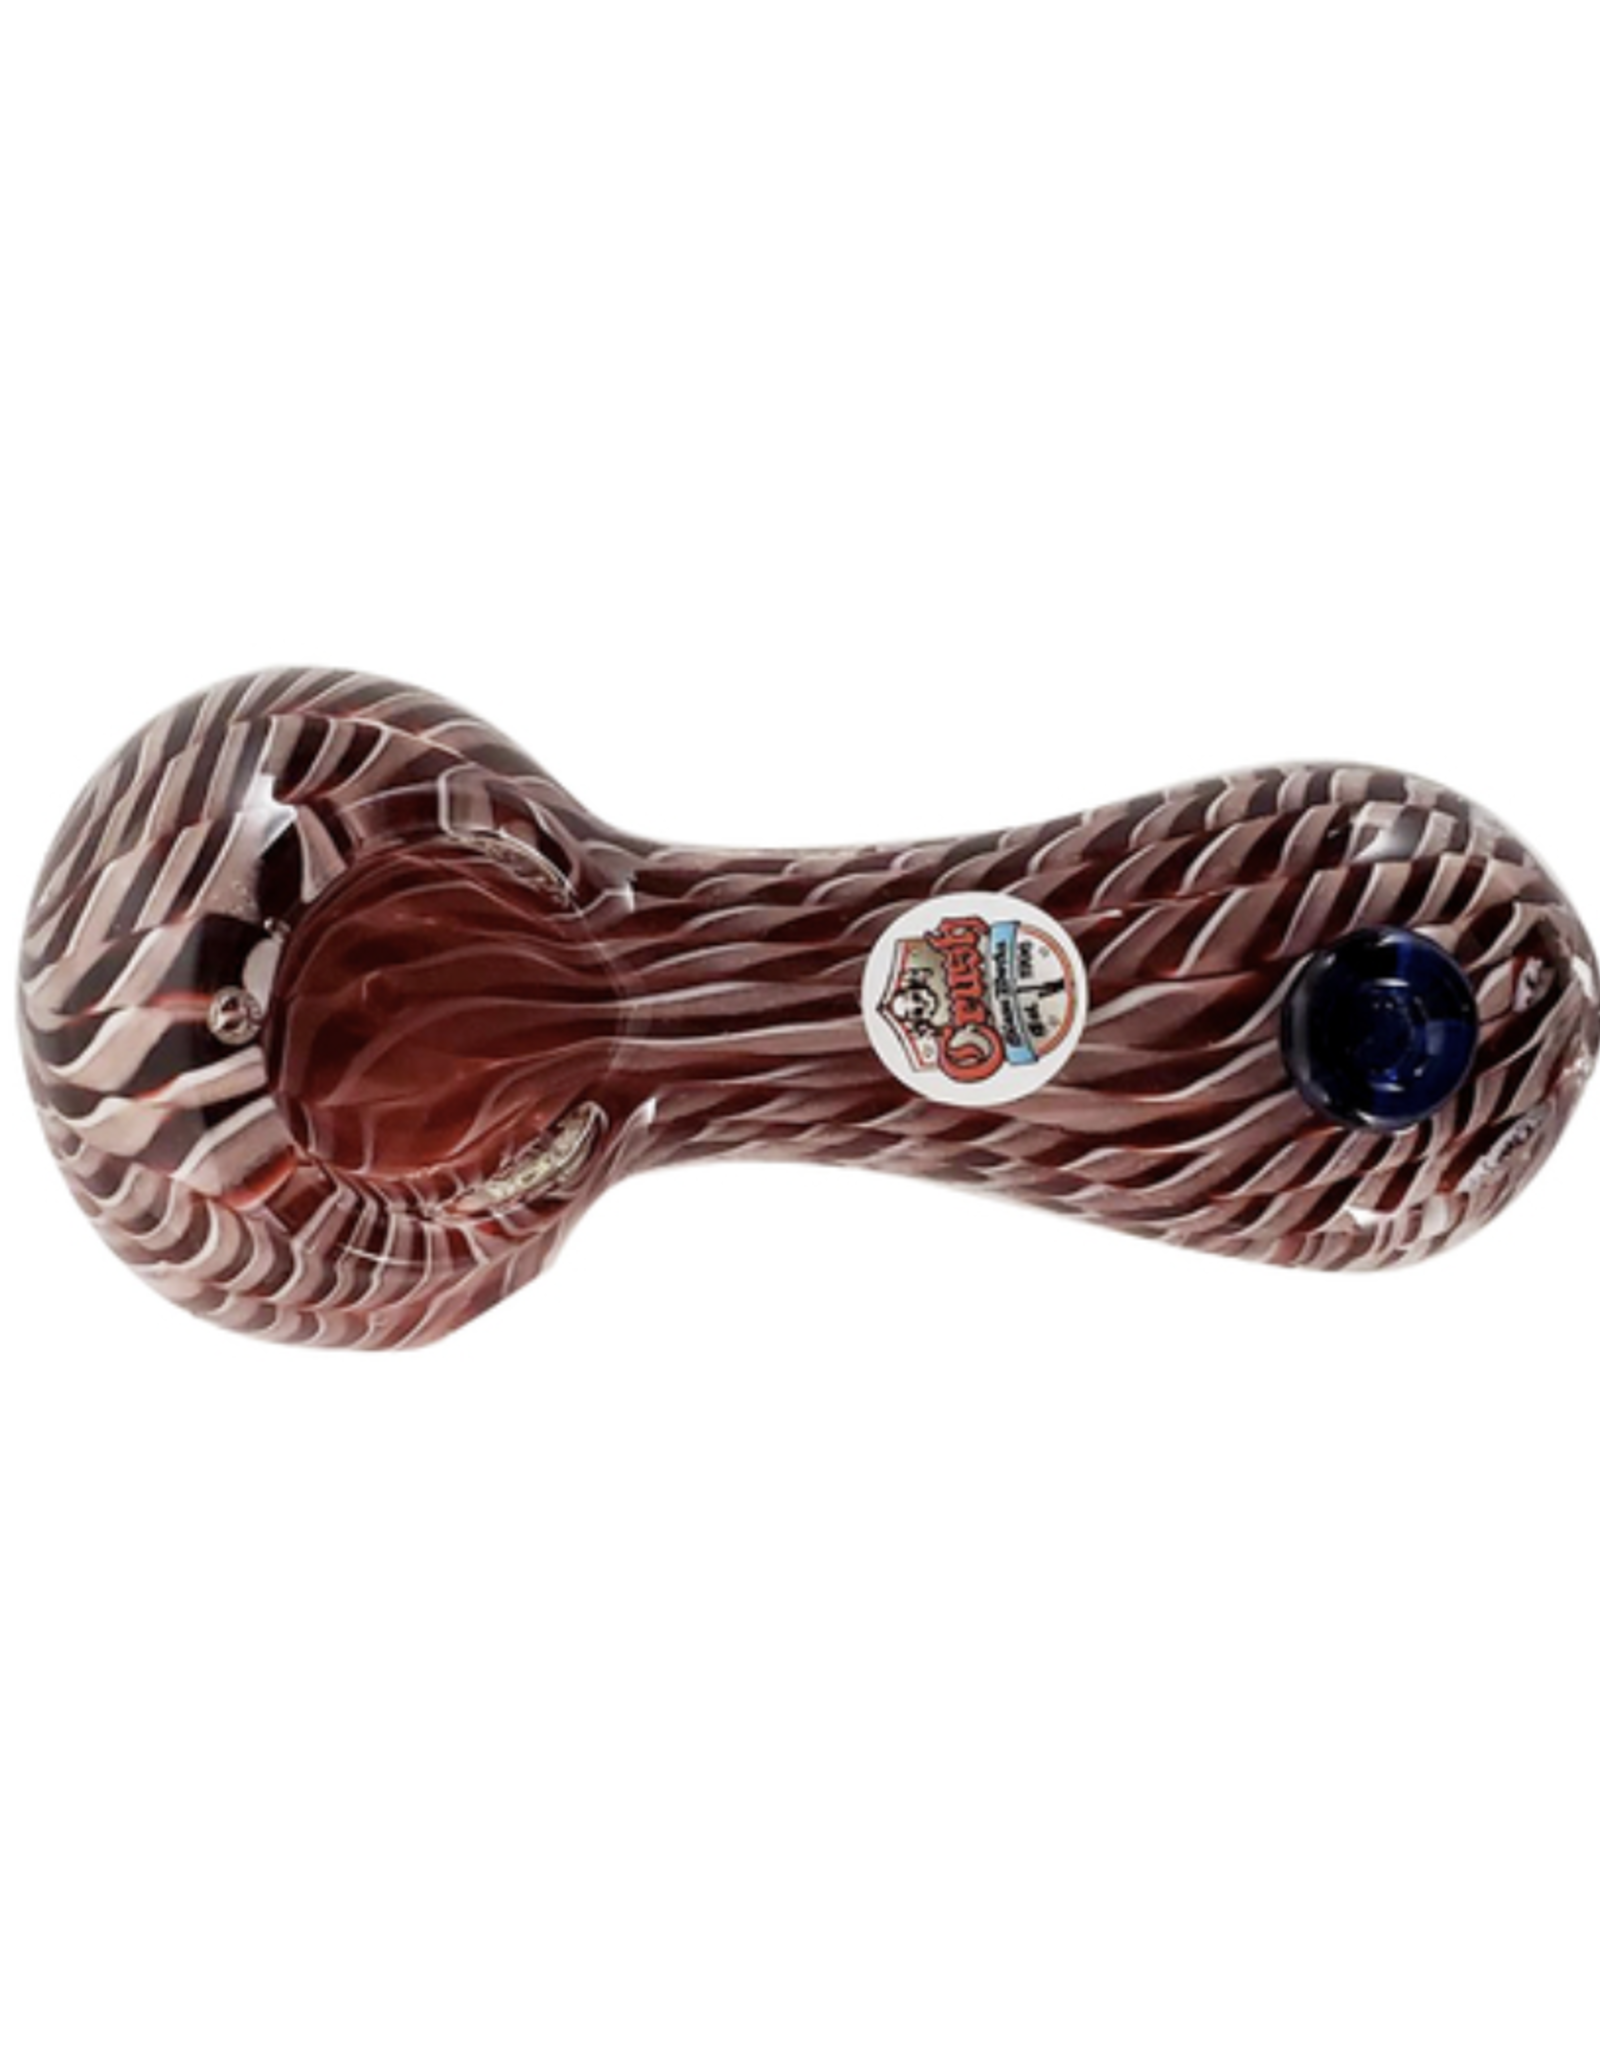 The Crush 3.75" Thick Latty Spoon with Flat Mouthpiece & Button